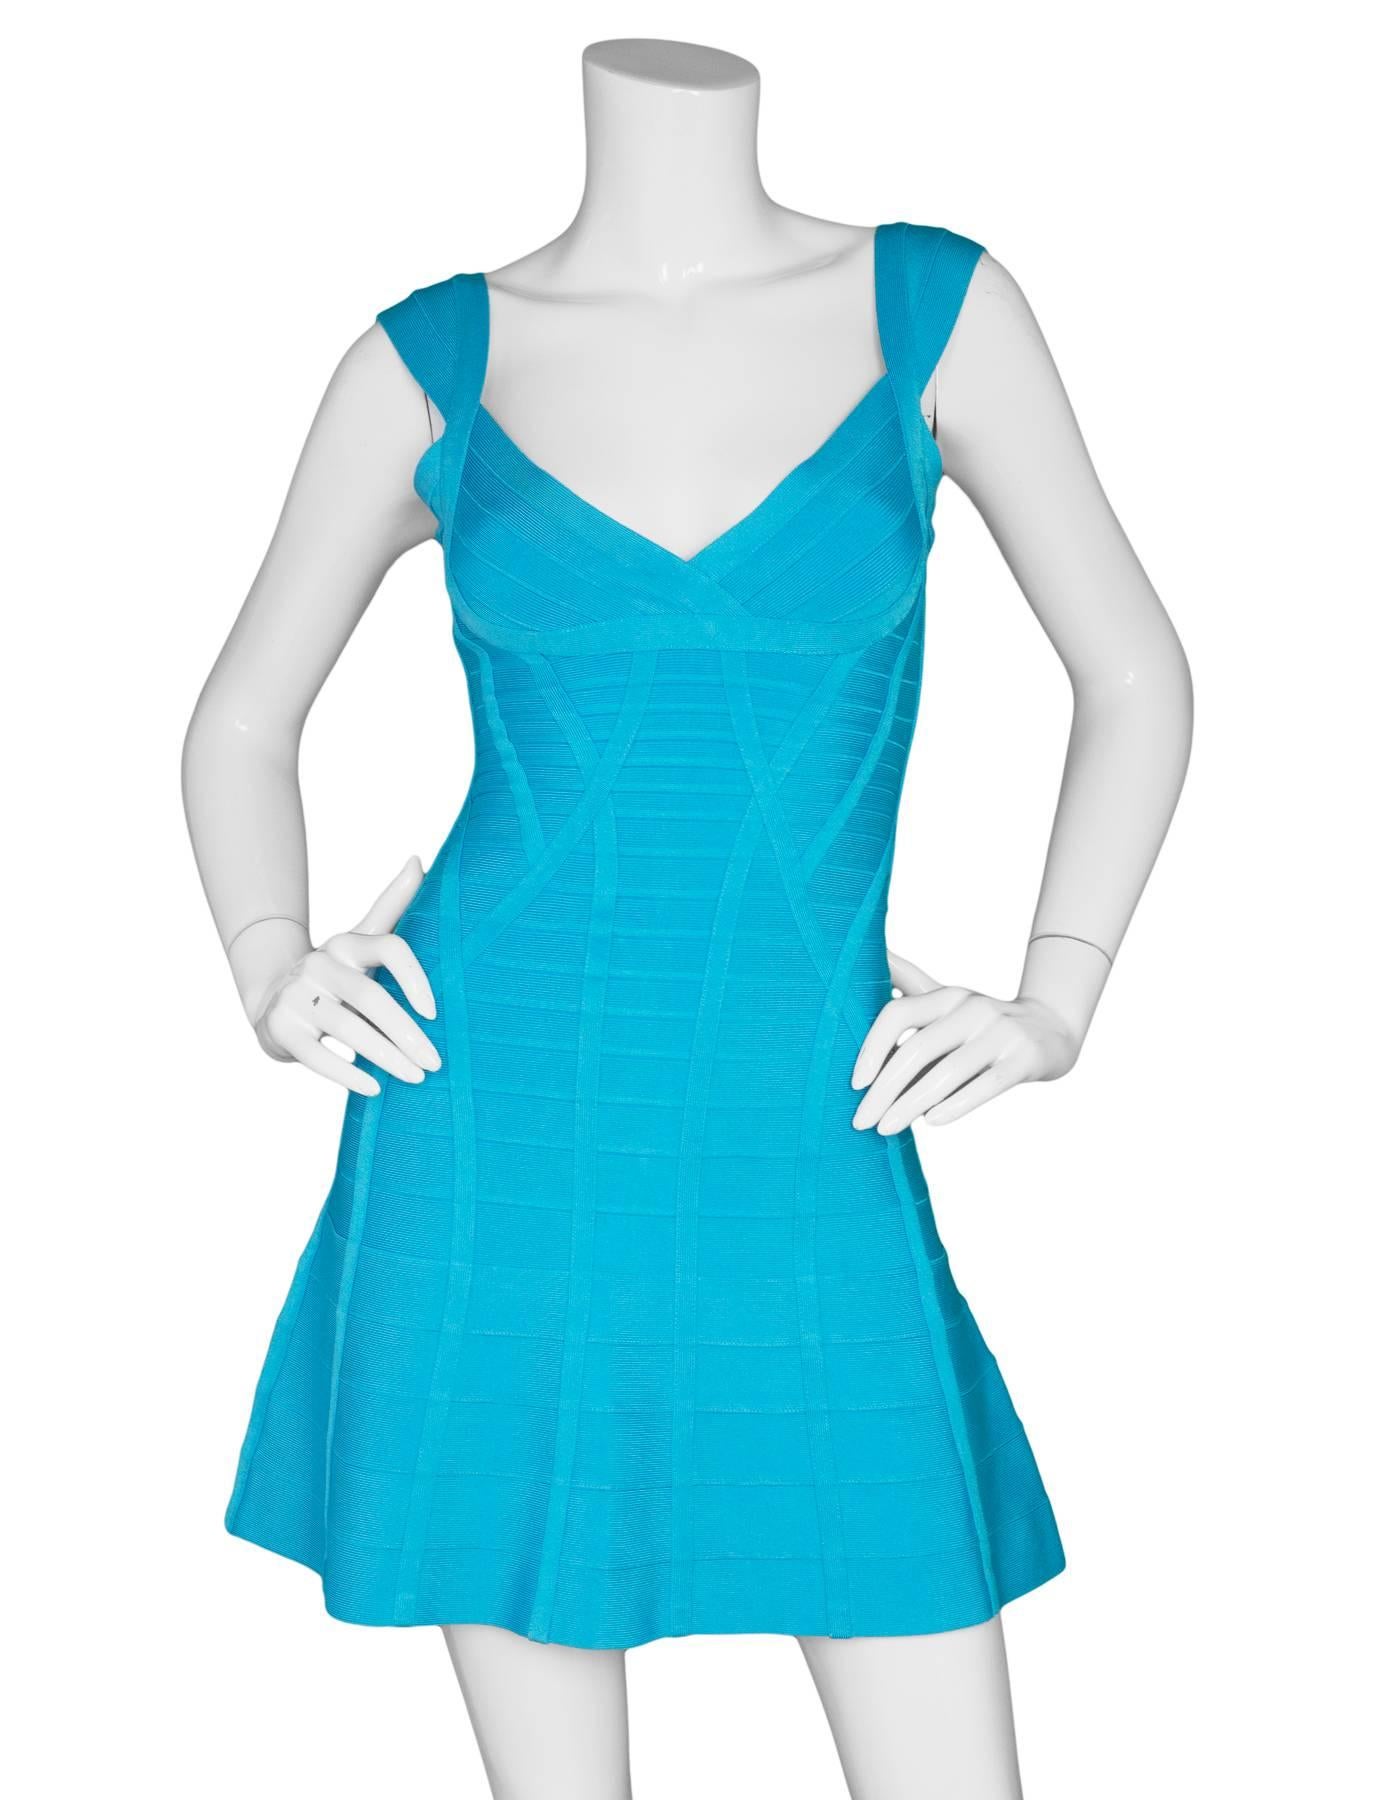 Herve Leger Blue Bandage Flare Dress Sz S

Made In: China
Color: Blue
Composition: 90% Rayon, 9% Nylon, 1% Spandex
Lining: None
Closure/Opening: Zip closure at back
Exterior Pockets: None
Interior Pockets: None
Overall Conditon: Excellent pre-owned